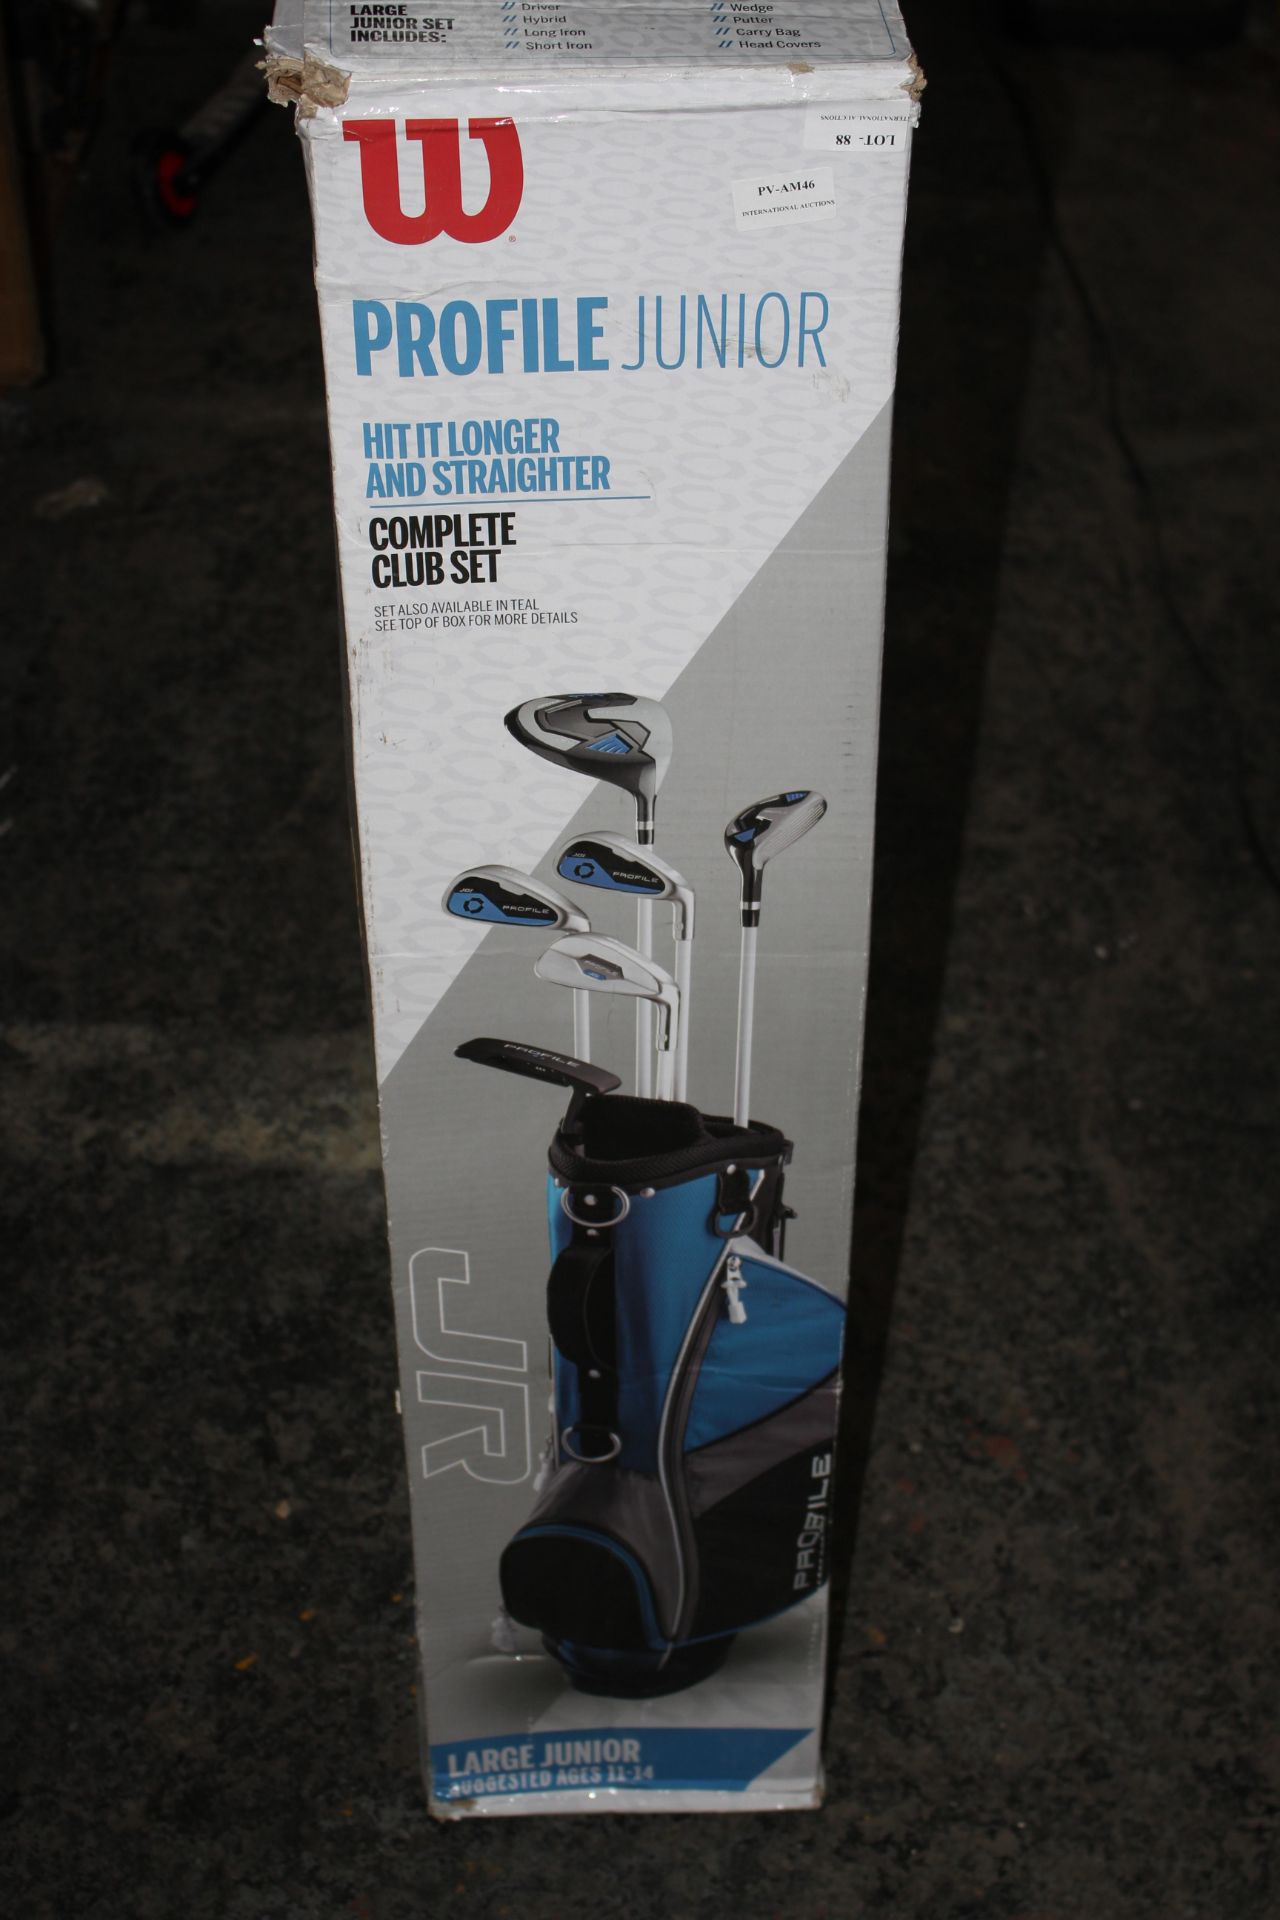 BOXED WILSON PROFILE JUNIOR COMPLETE CLUB SET LARGE JUNIOR AGES 11-14 RRP £129.00Condition